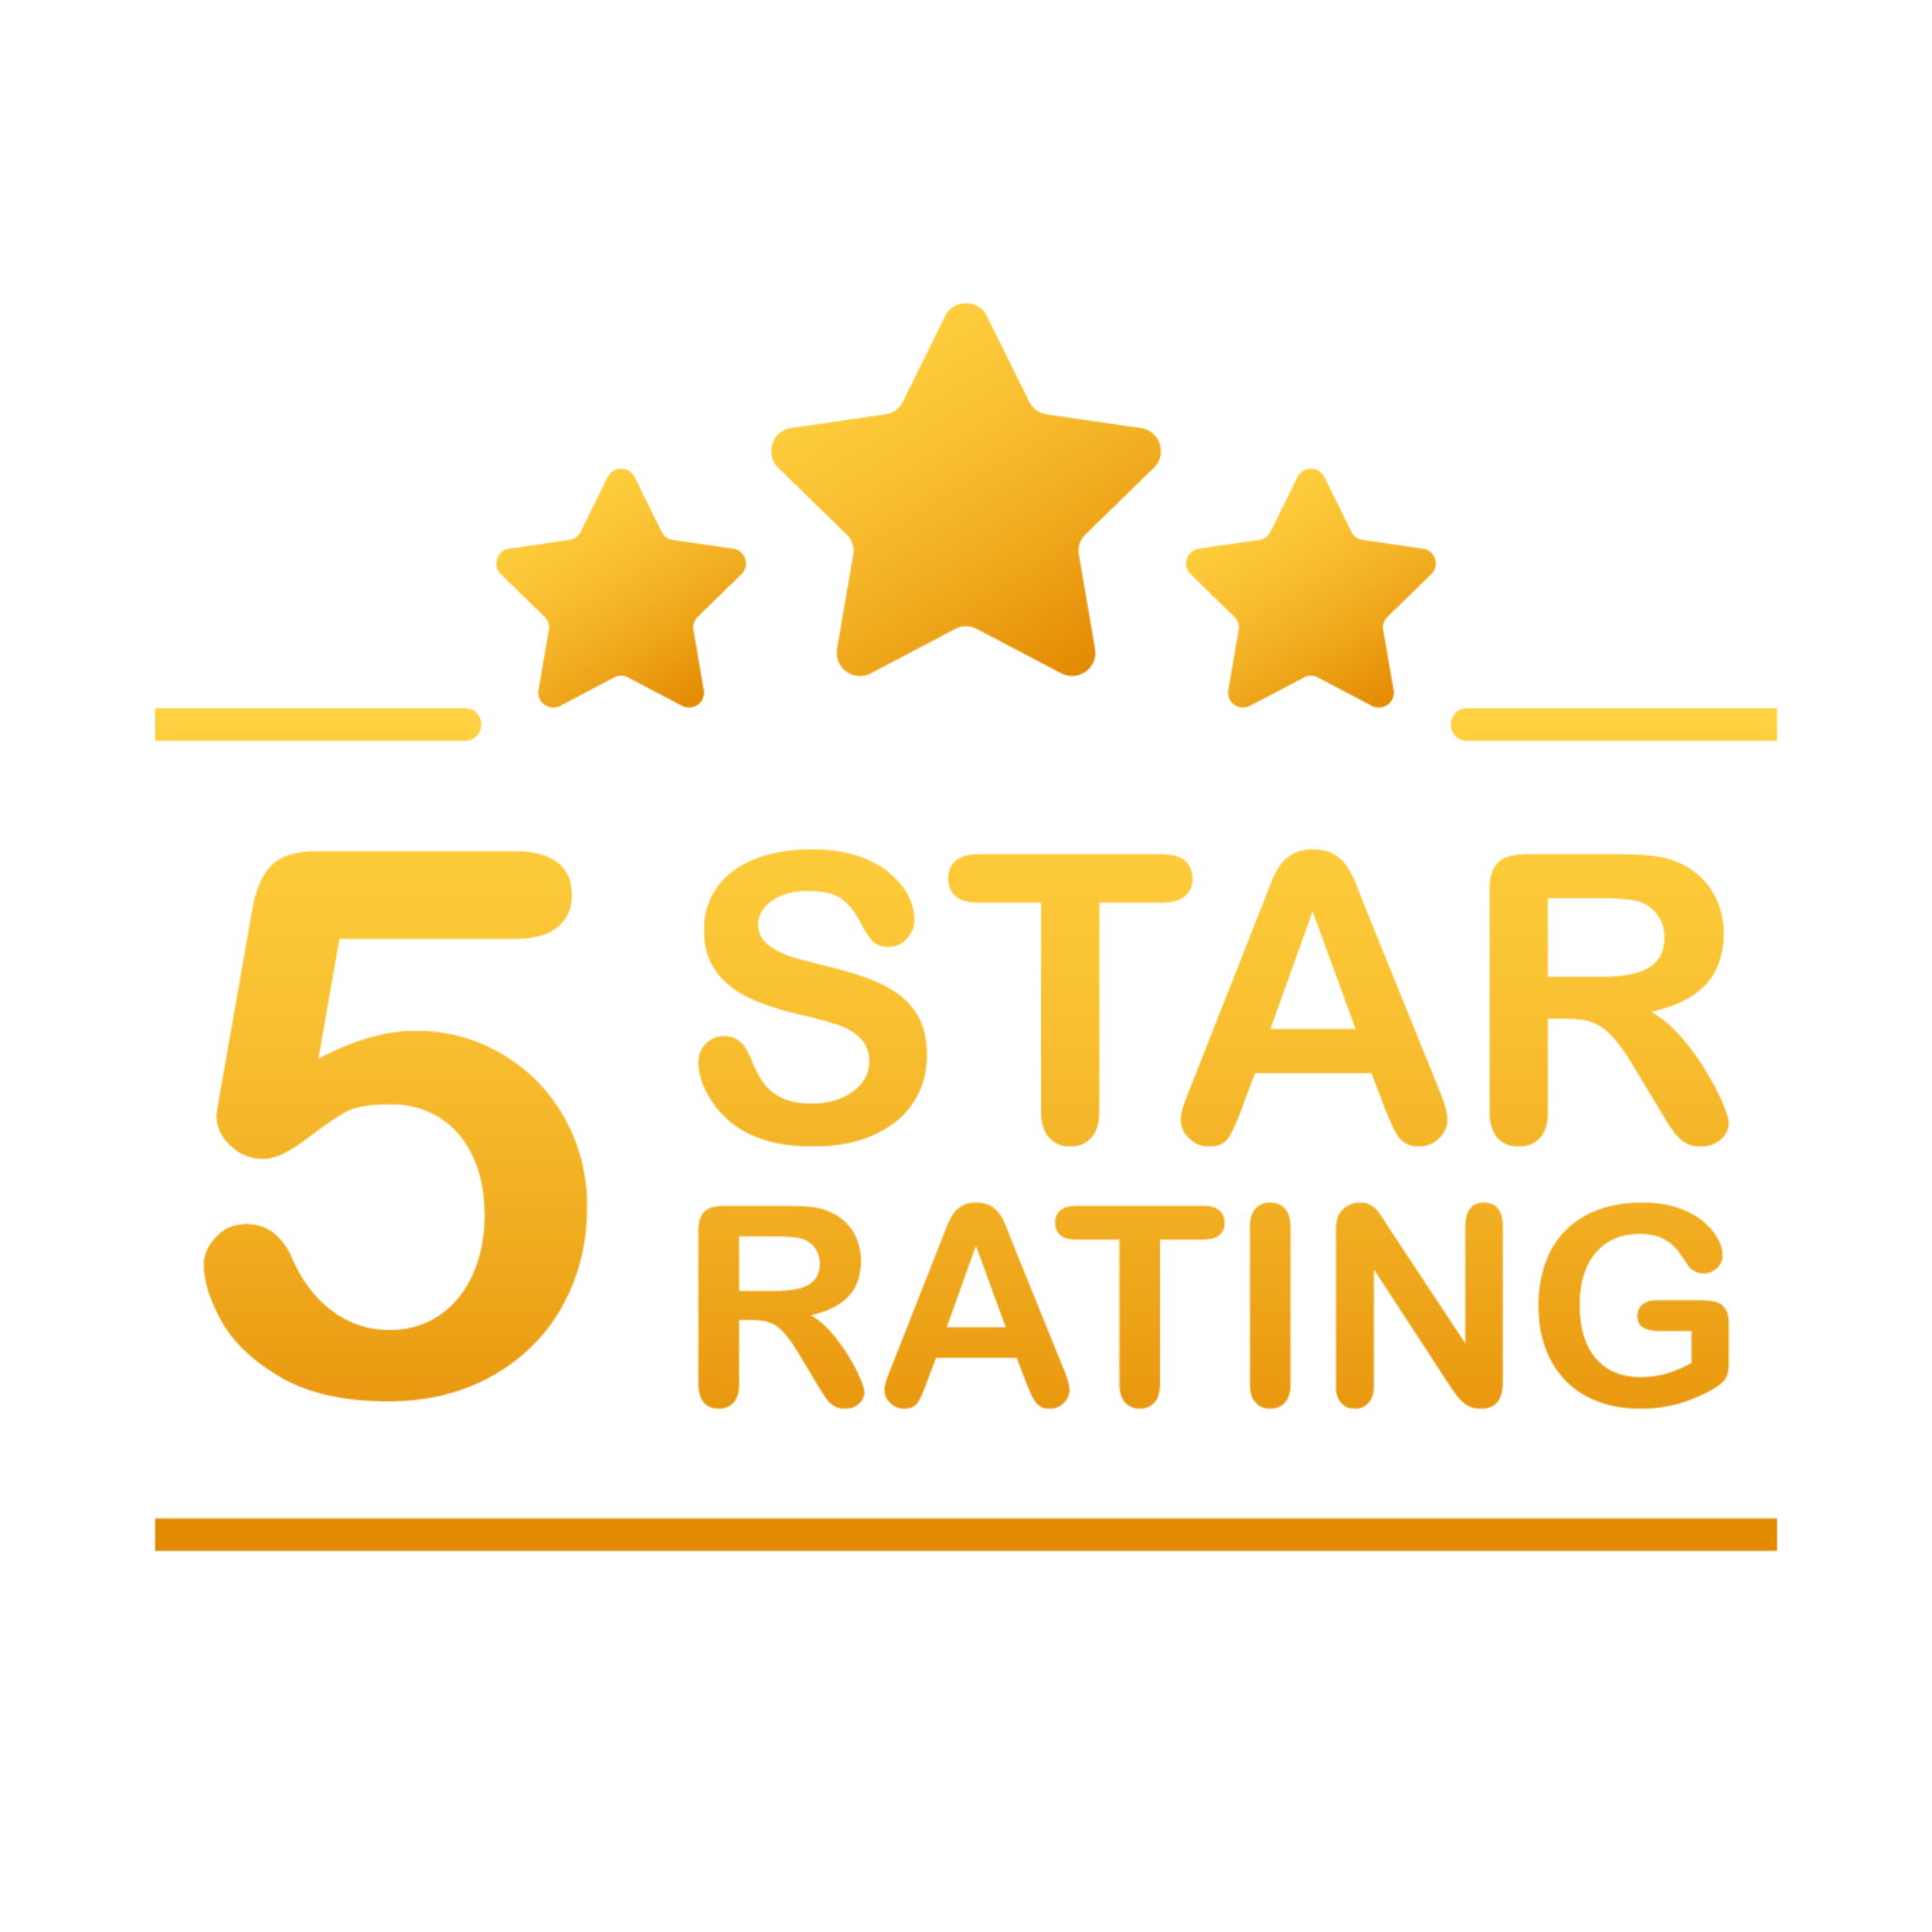 E5 star review imagexample image